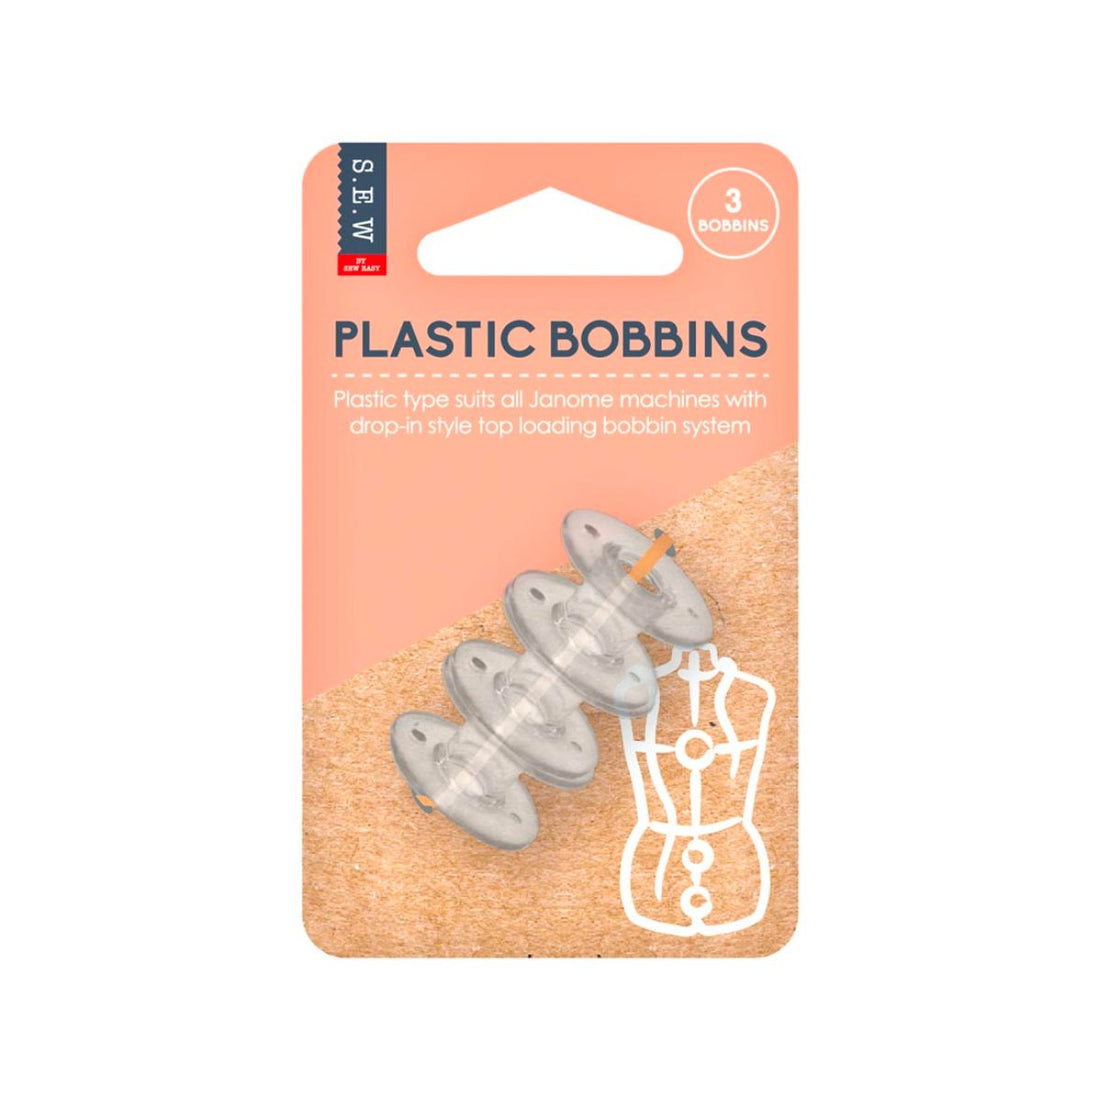 sew easy janome style plastic bobbins pack of 3